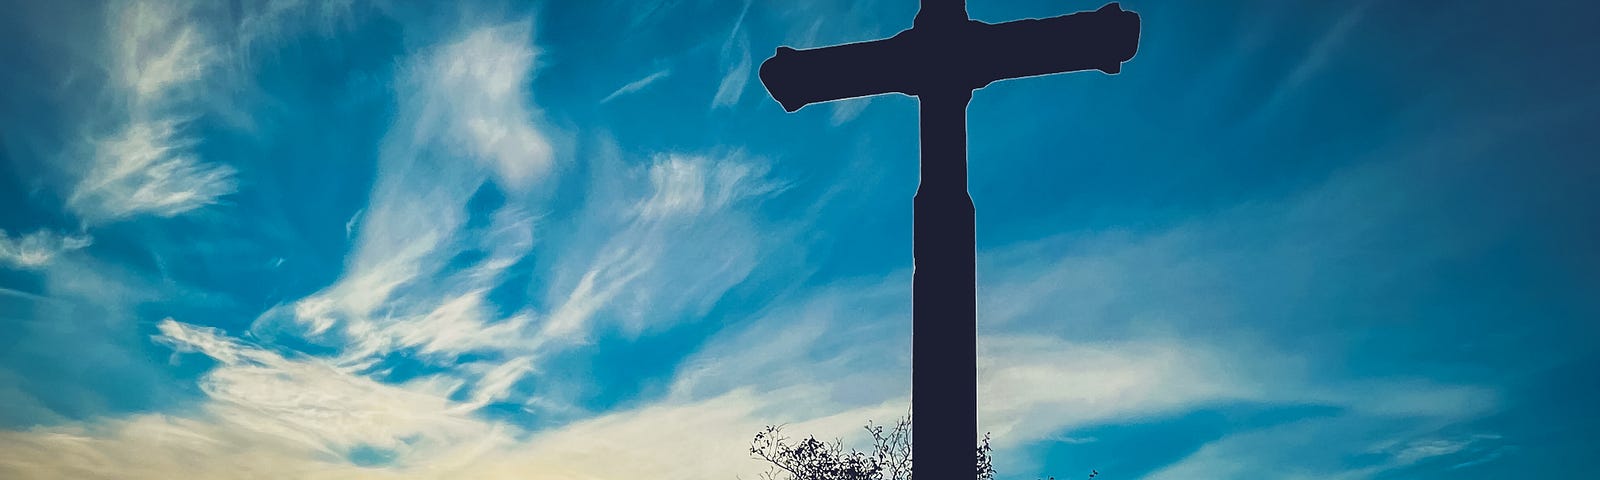 The silouette of a person kneeling at a cross with a blue and yellow sky in the background